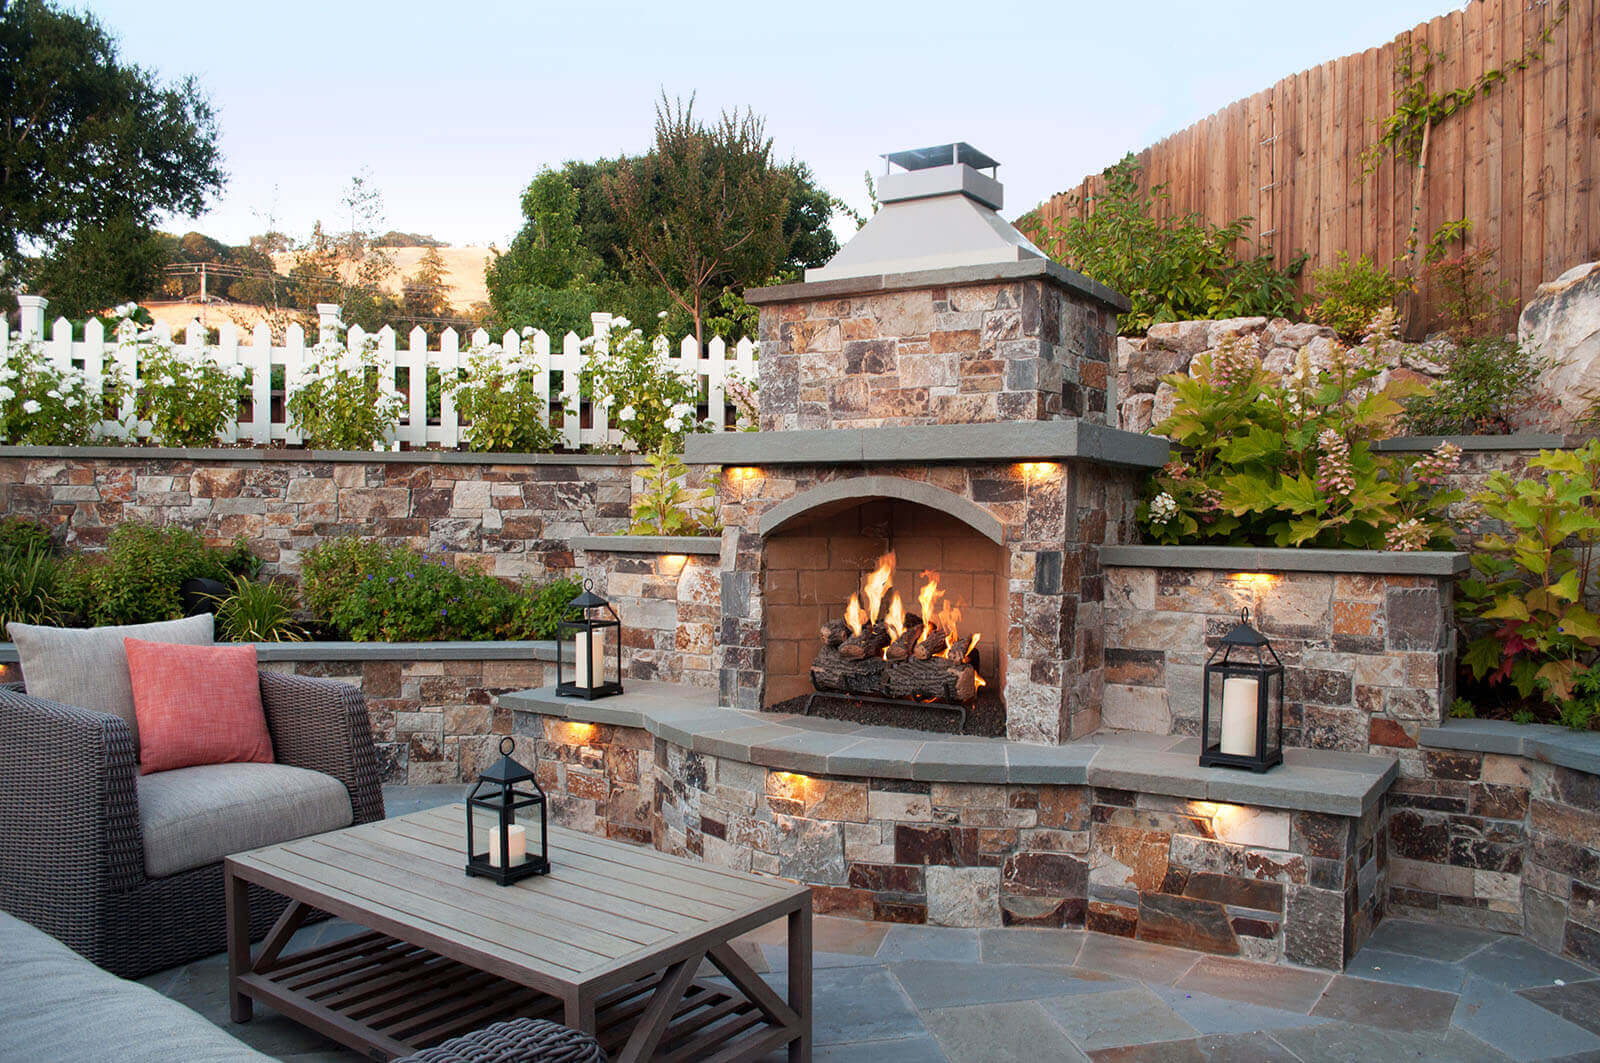 Stone and brick outdoor short fireplace with large hearth, next to lounging area